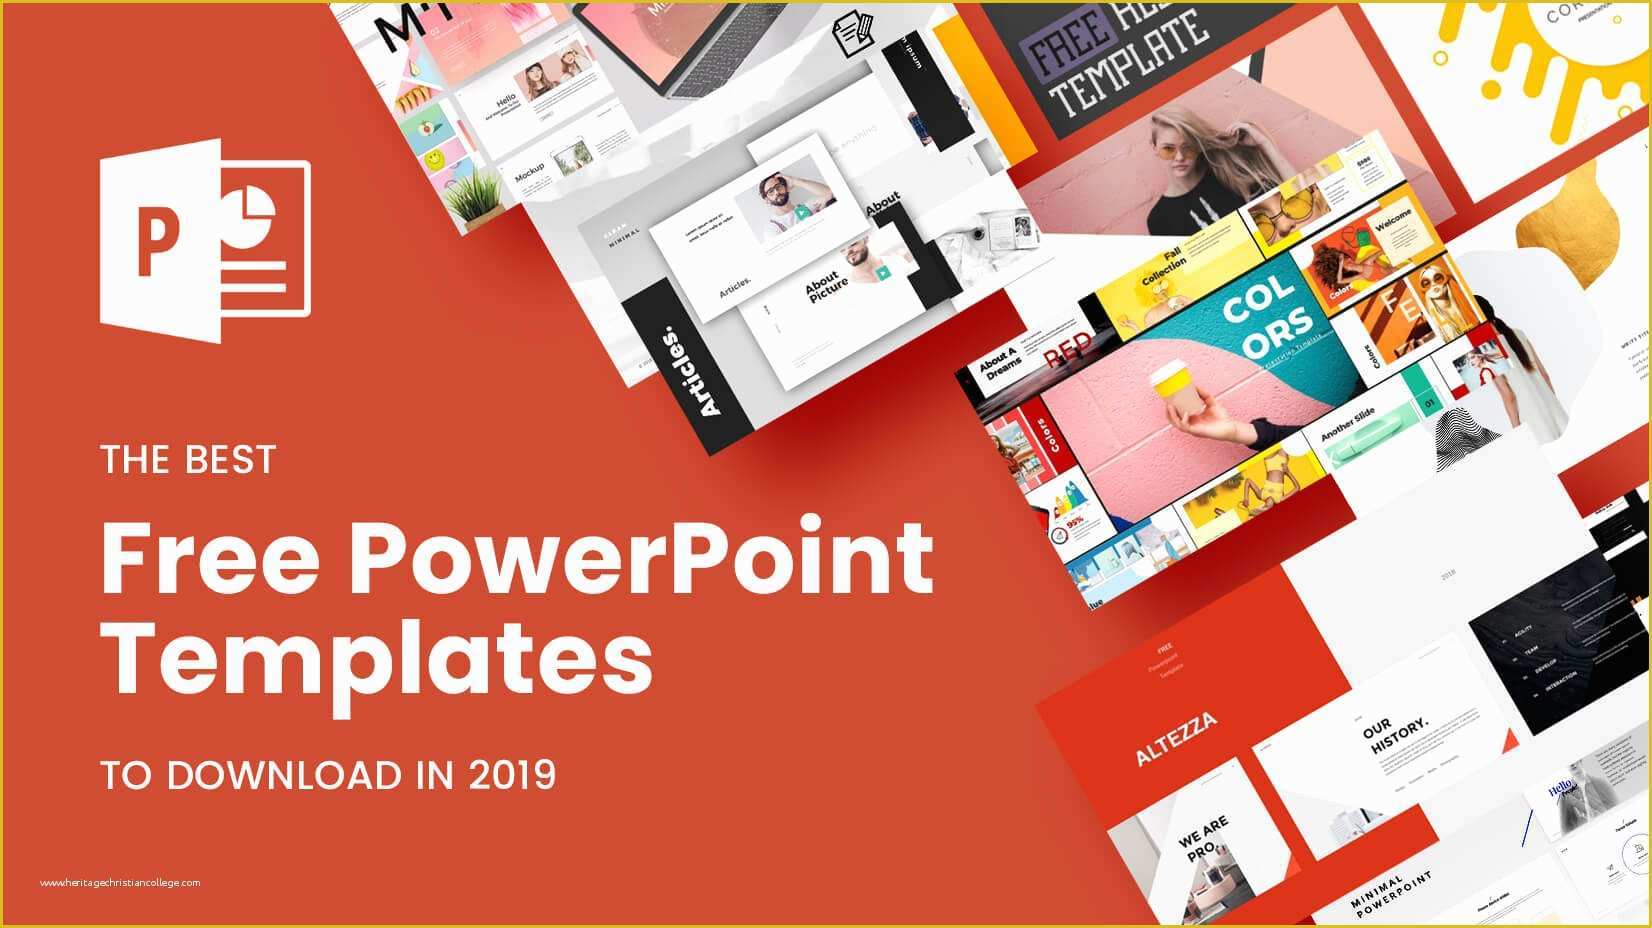 Best Powerpoint Templates Free Download Of the Best Free Powerpoint Templates to Download In 2019